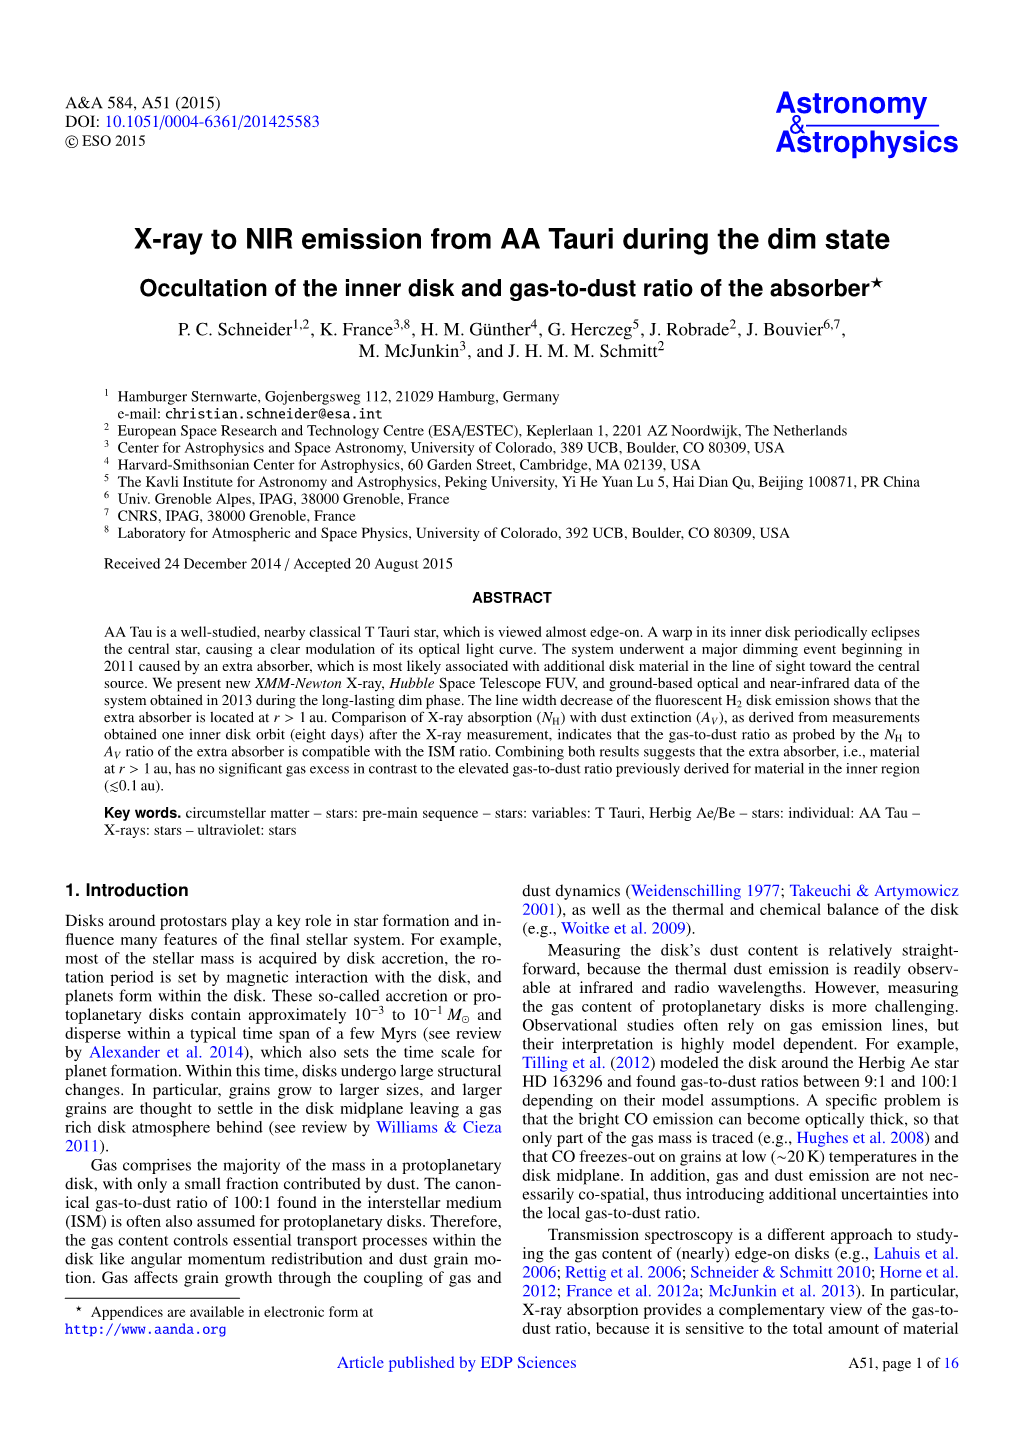 X-Ray to NIR Emission from AA Tauri During the Dim State Occultation of the Inner Disk and Gas-To-Dust Ratio of the Absorber?